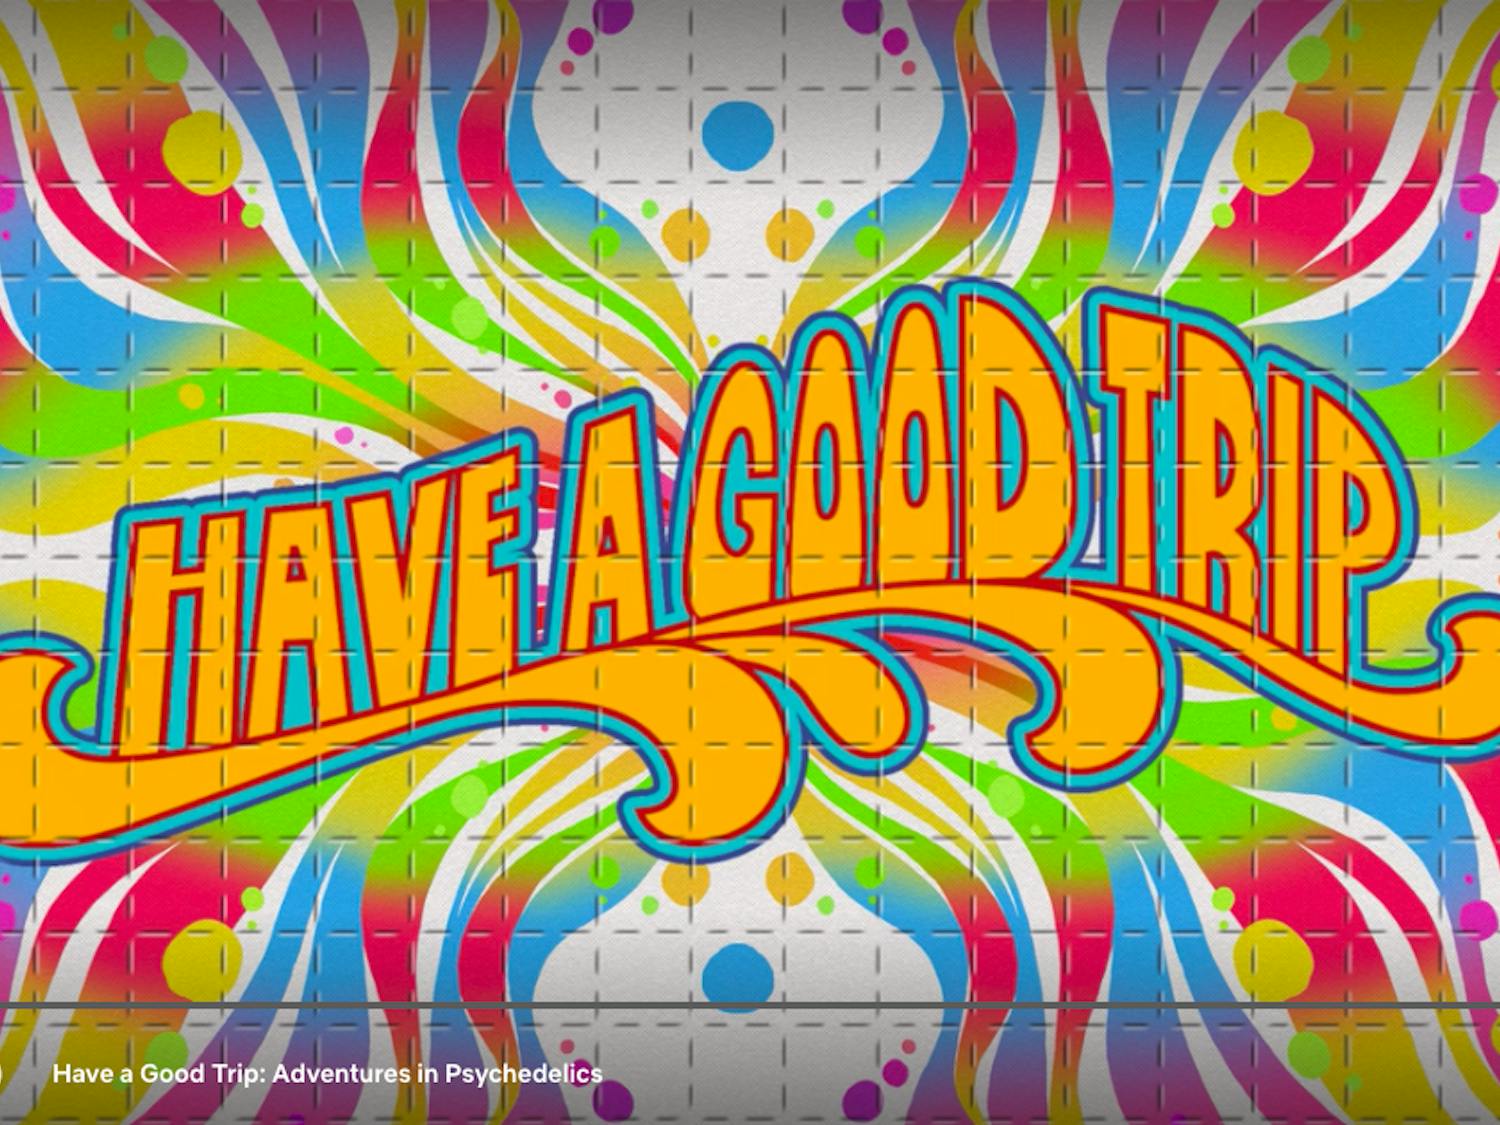 “Have a Good Trip” aims to debunk the idea that psychedelics are a torturous one-way journey towards psychosis by interviewing beloved celebrities and animating their spiritual, orgasmic and rejuvenating experiences in the psychedelic realm.